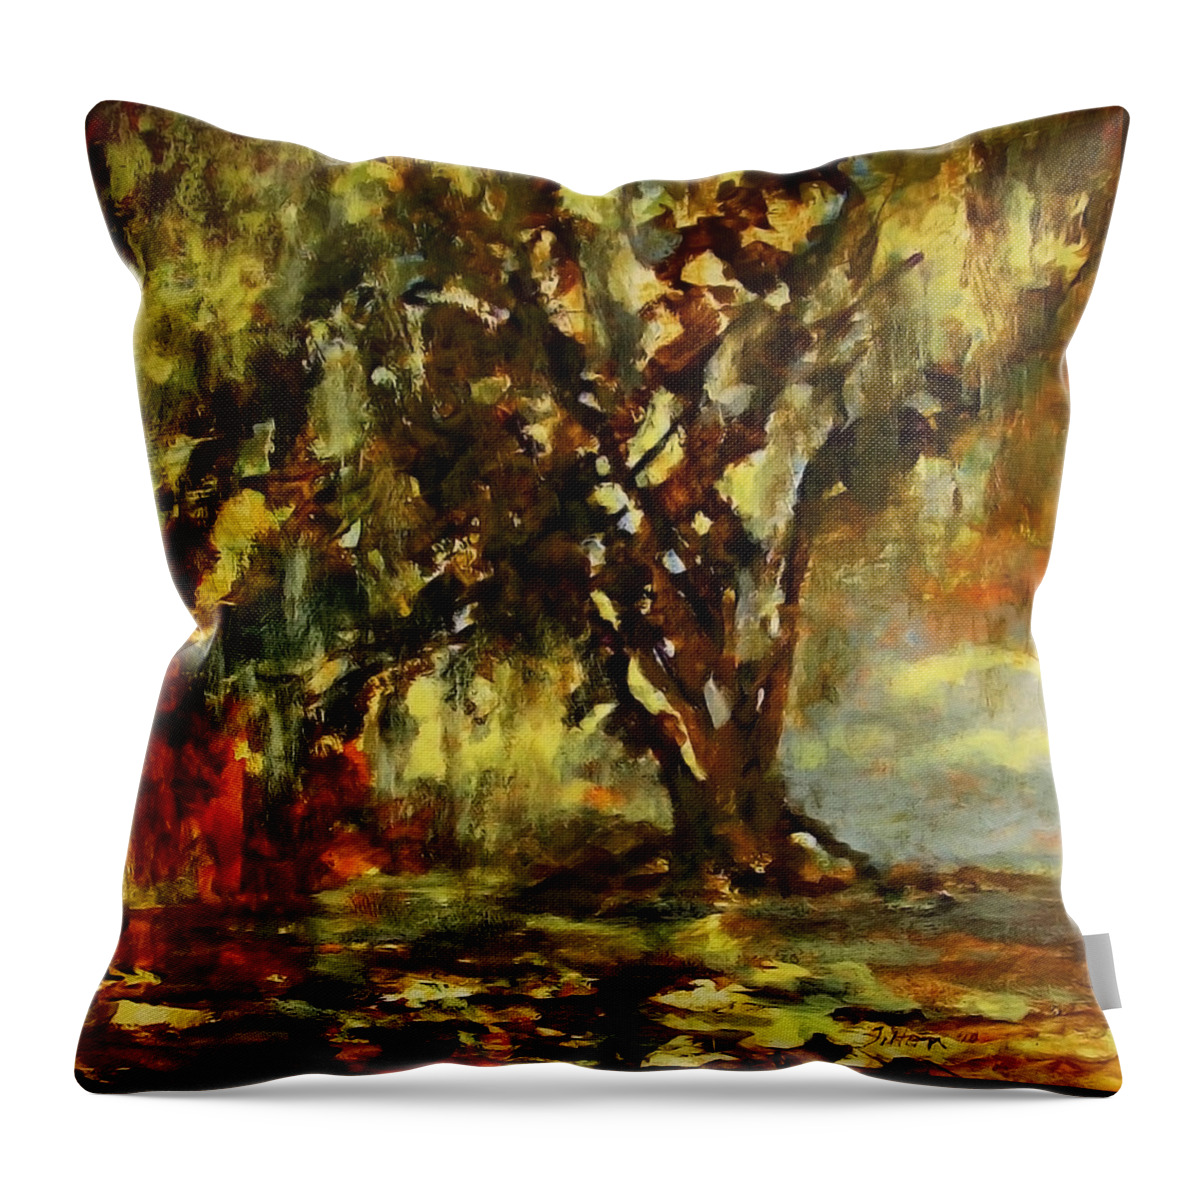 Art Throw Pillow featuring the painting Light through the Moss tree landscape painting by Julianne Felton